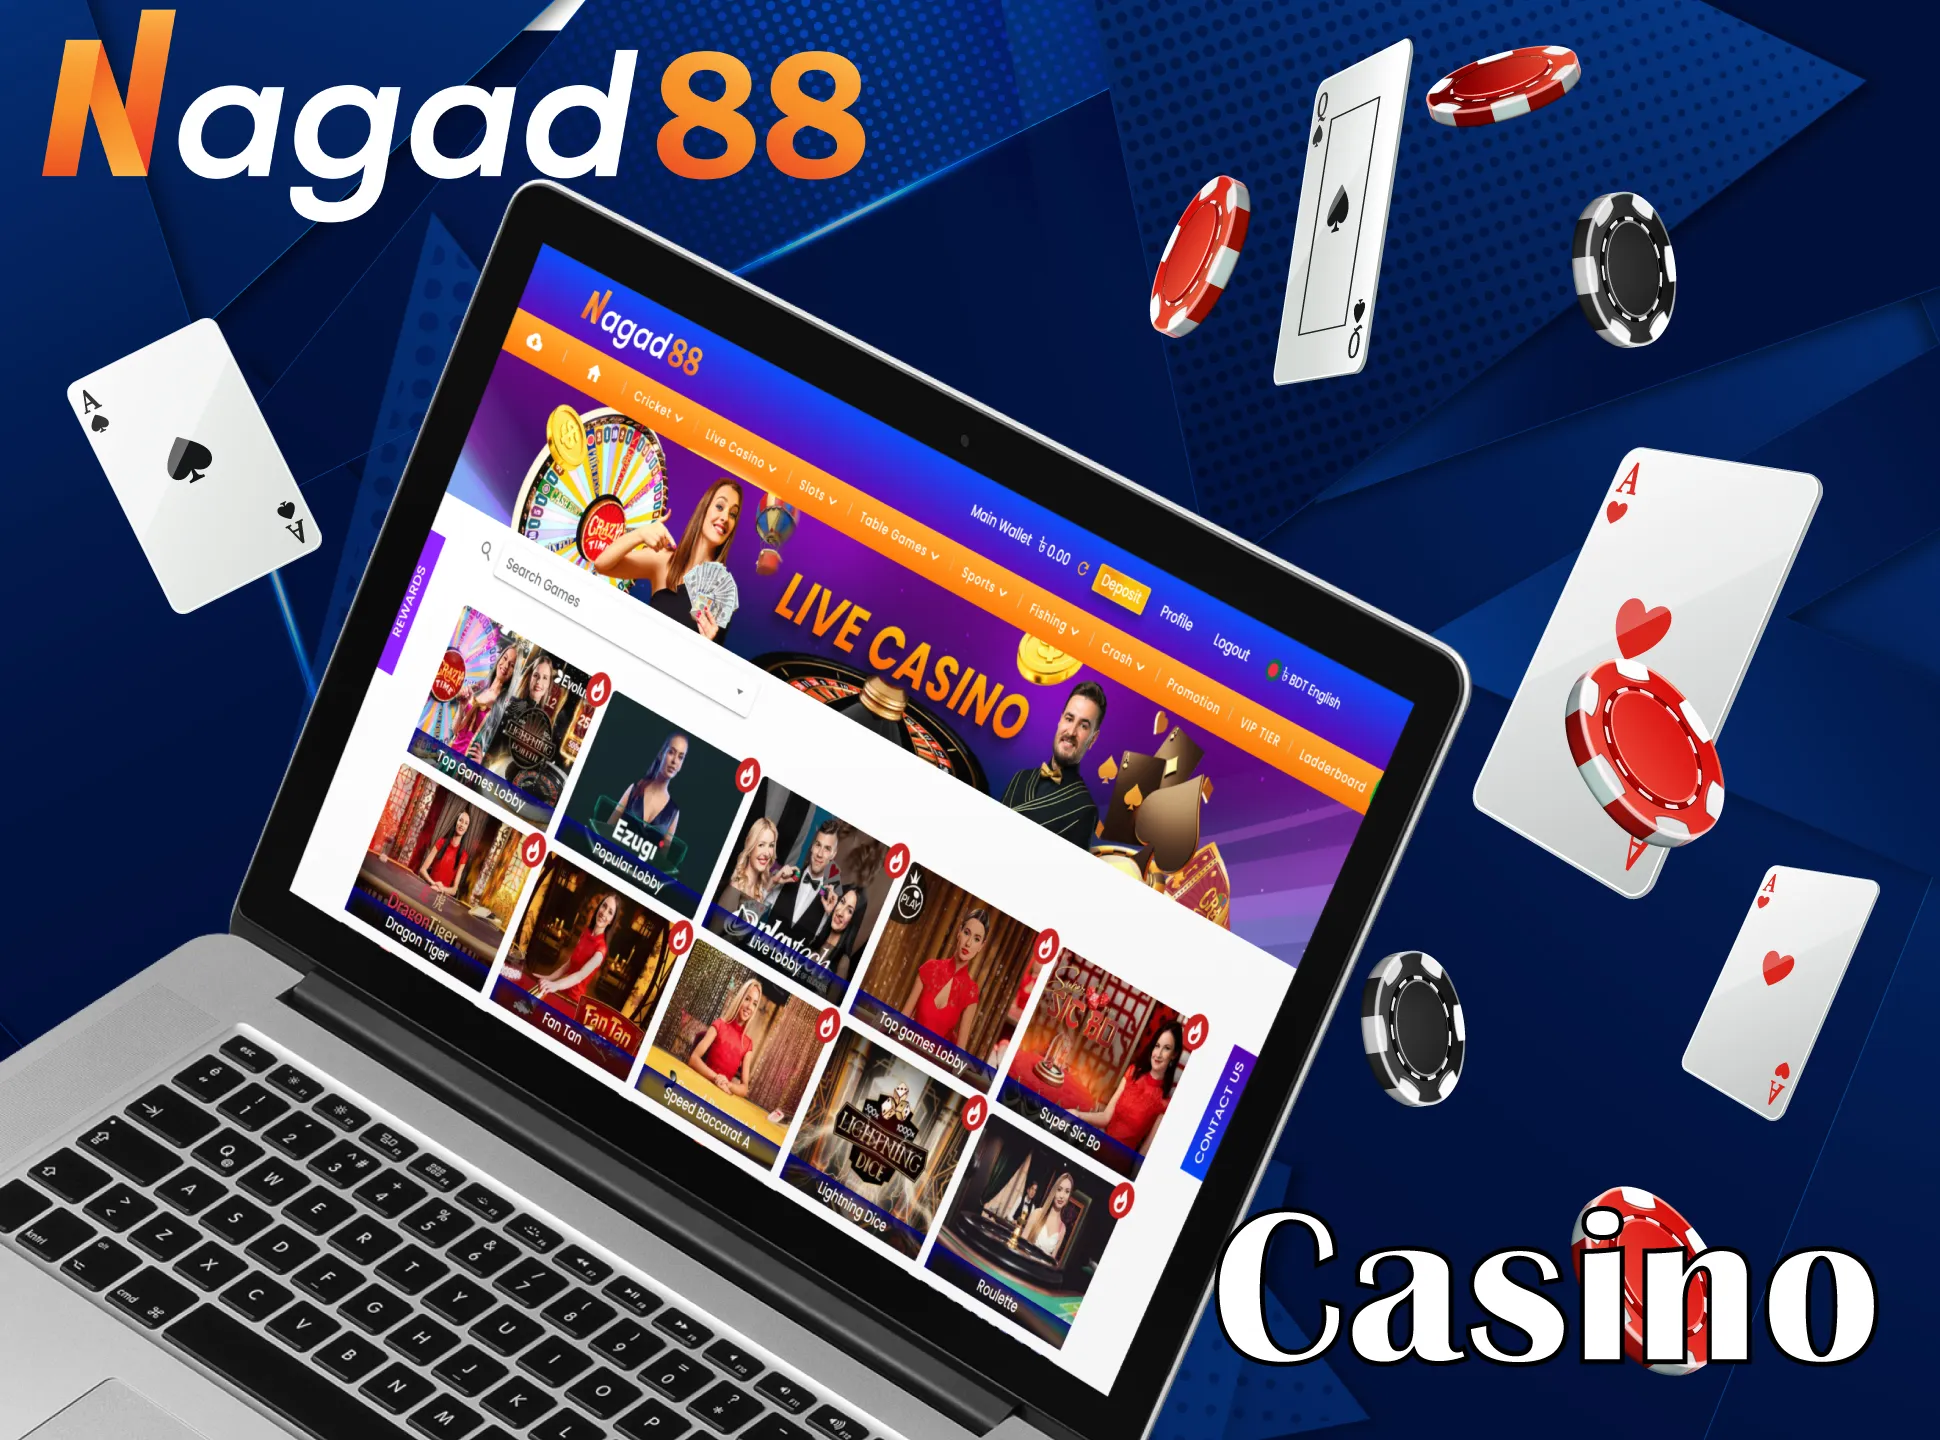 Play at the casino with Nagad88.